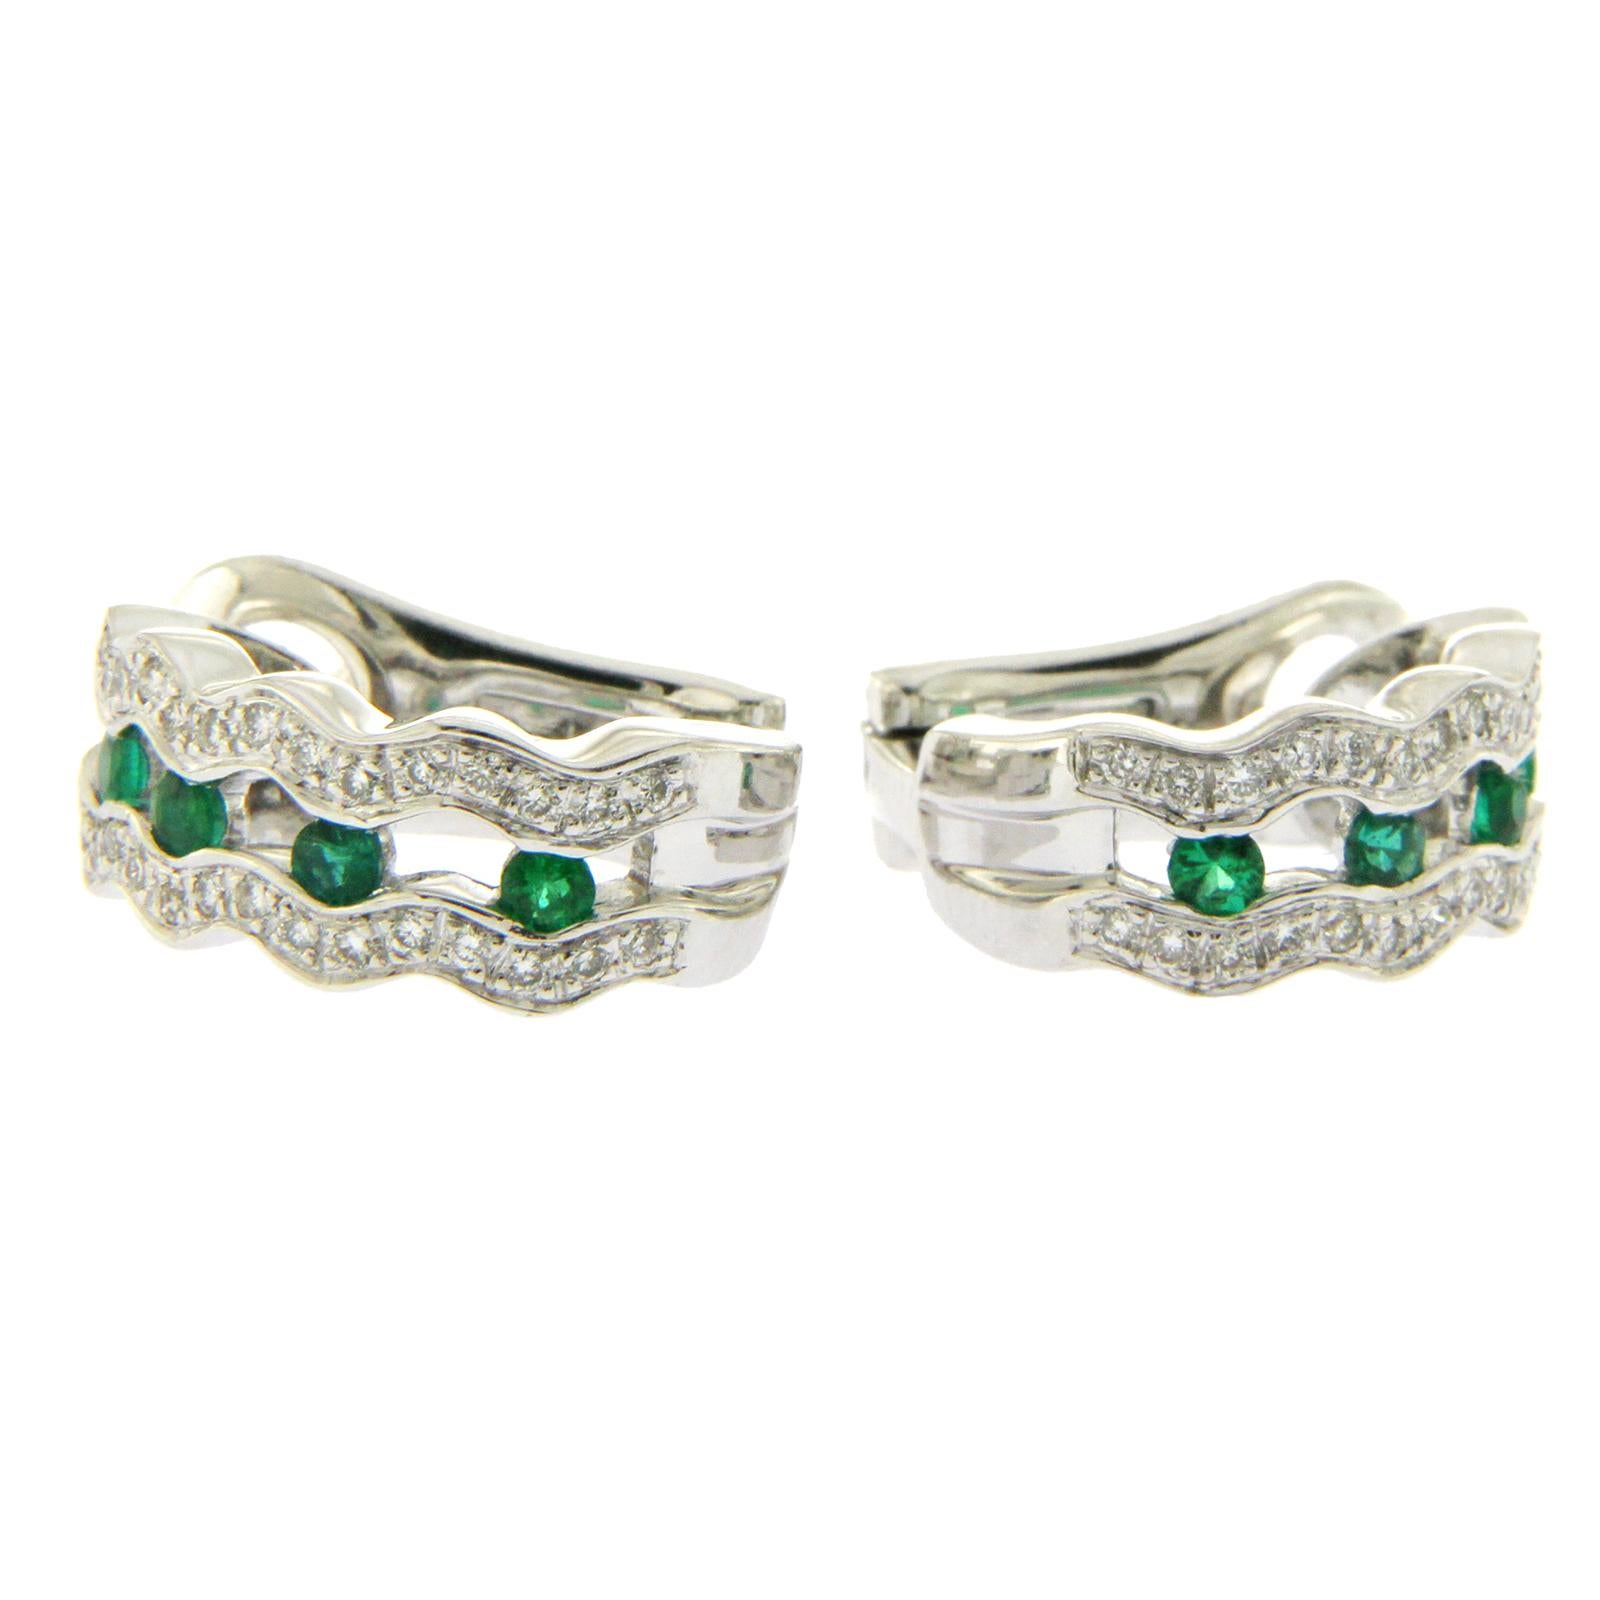 0.80 Ct Natural Emerald & 0.82 Ct Diamonds In 18k White Gold Earrings For Sale 2